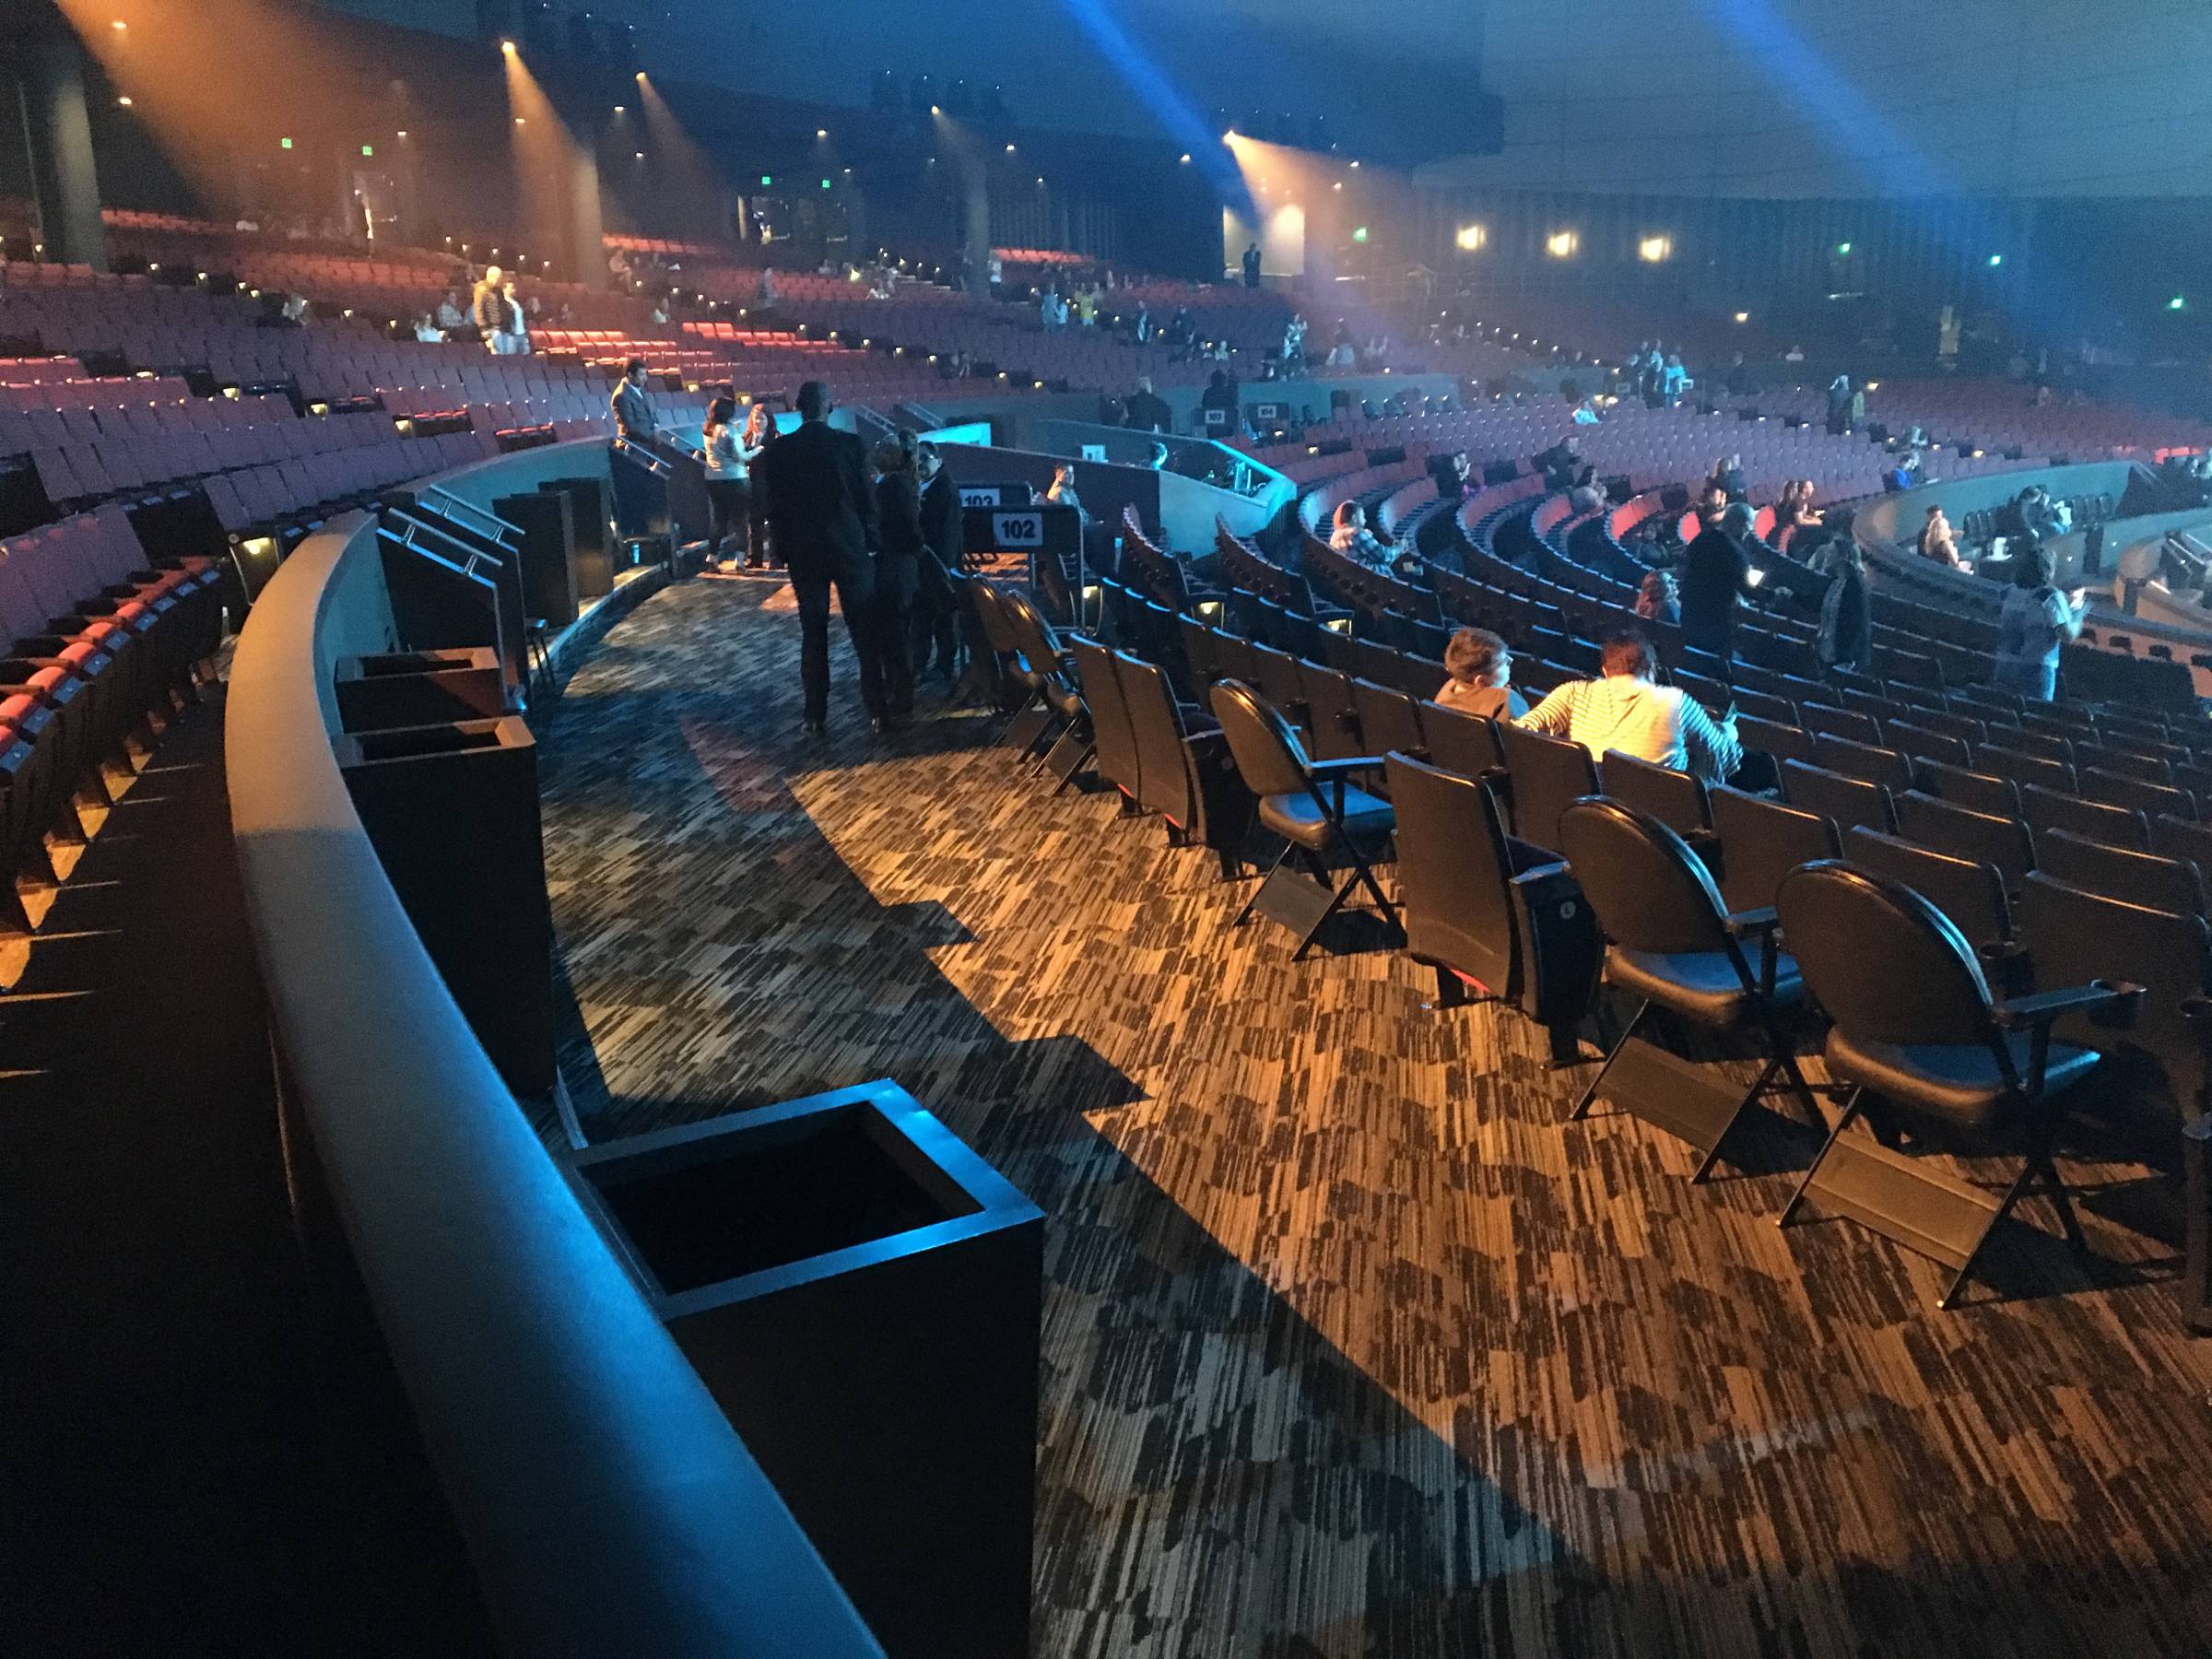 Zappos Theater Orchestra Concert Seating Rateyourseats Com